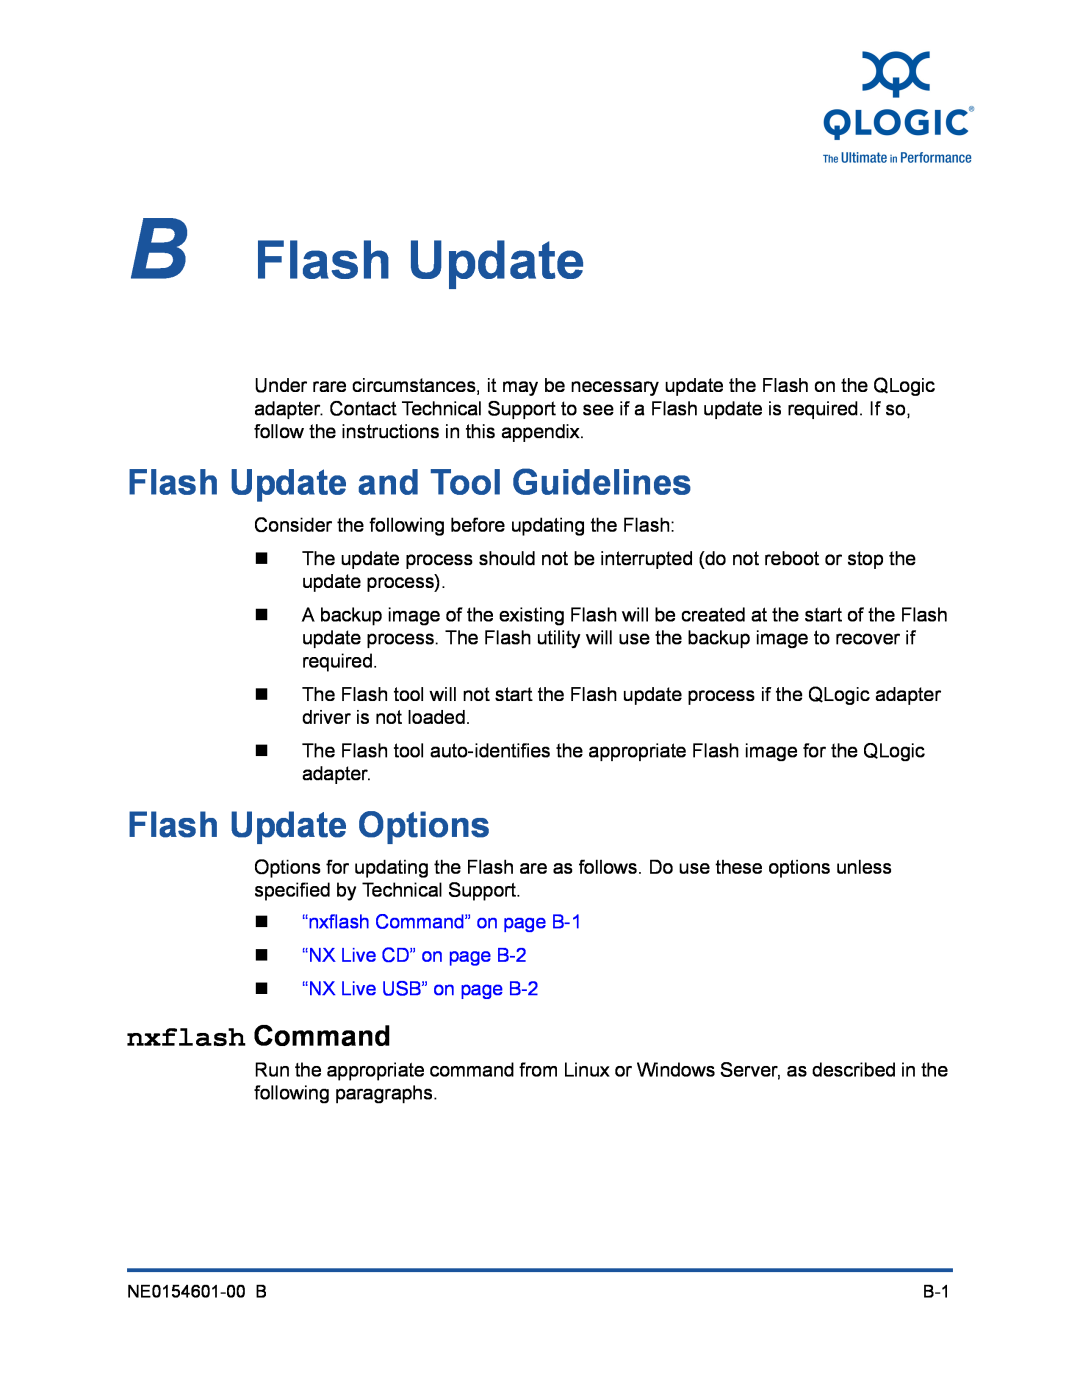 Q-Logic 3000, 3100 manual B Flash Update, Flash Update and Tool Guidelines, Flash Update Options, nxflash Command 